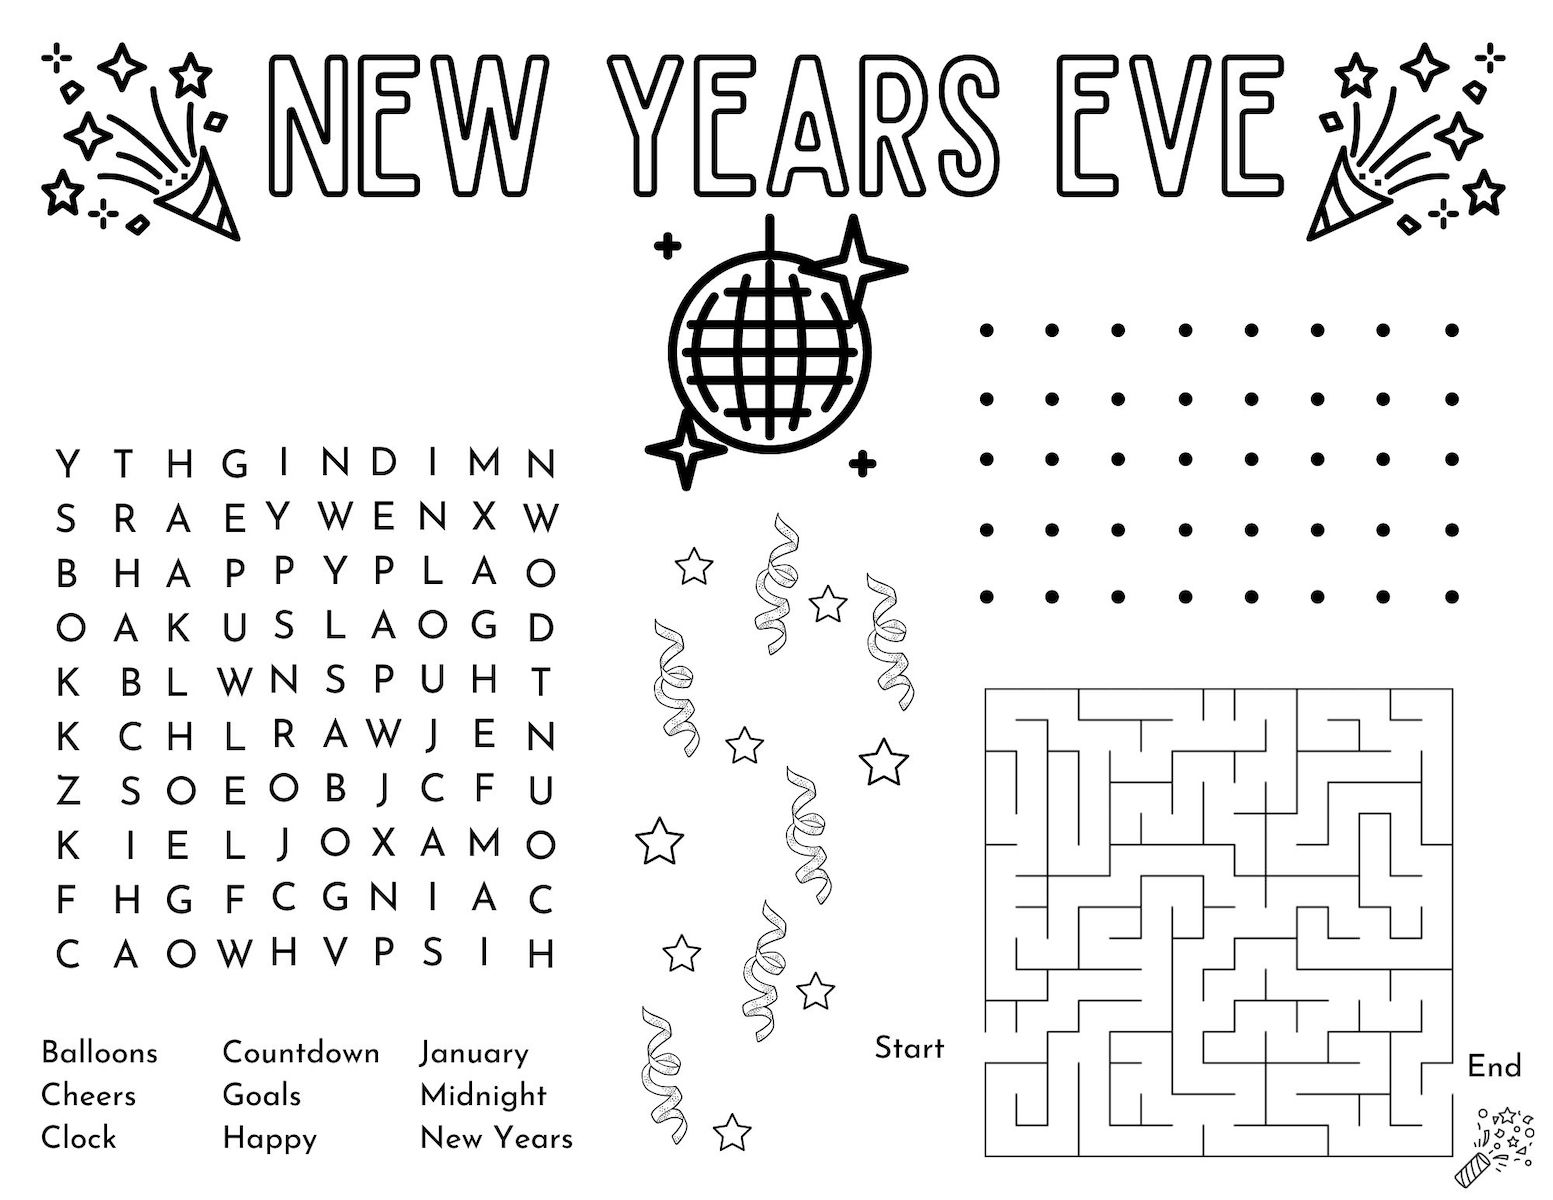 new-years-eve-activity-page-for-kids-free-printable-originalmom